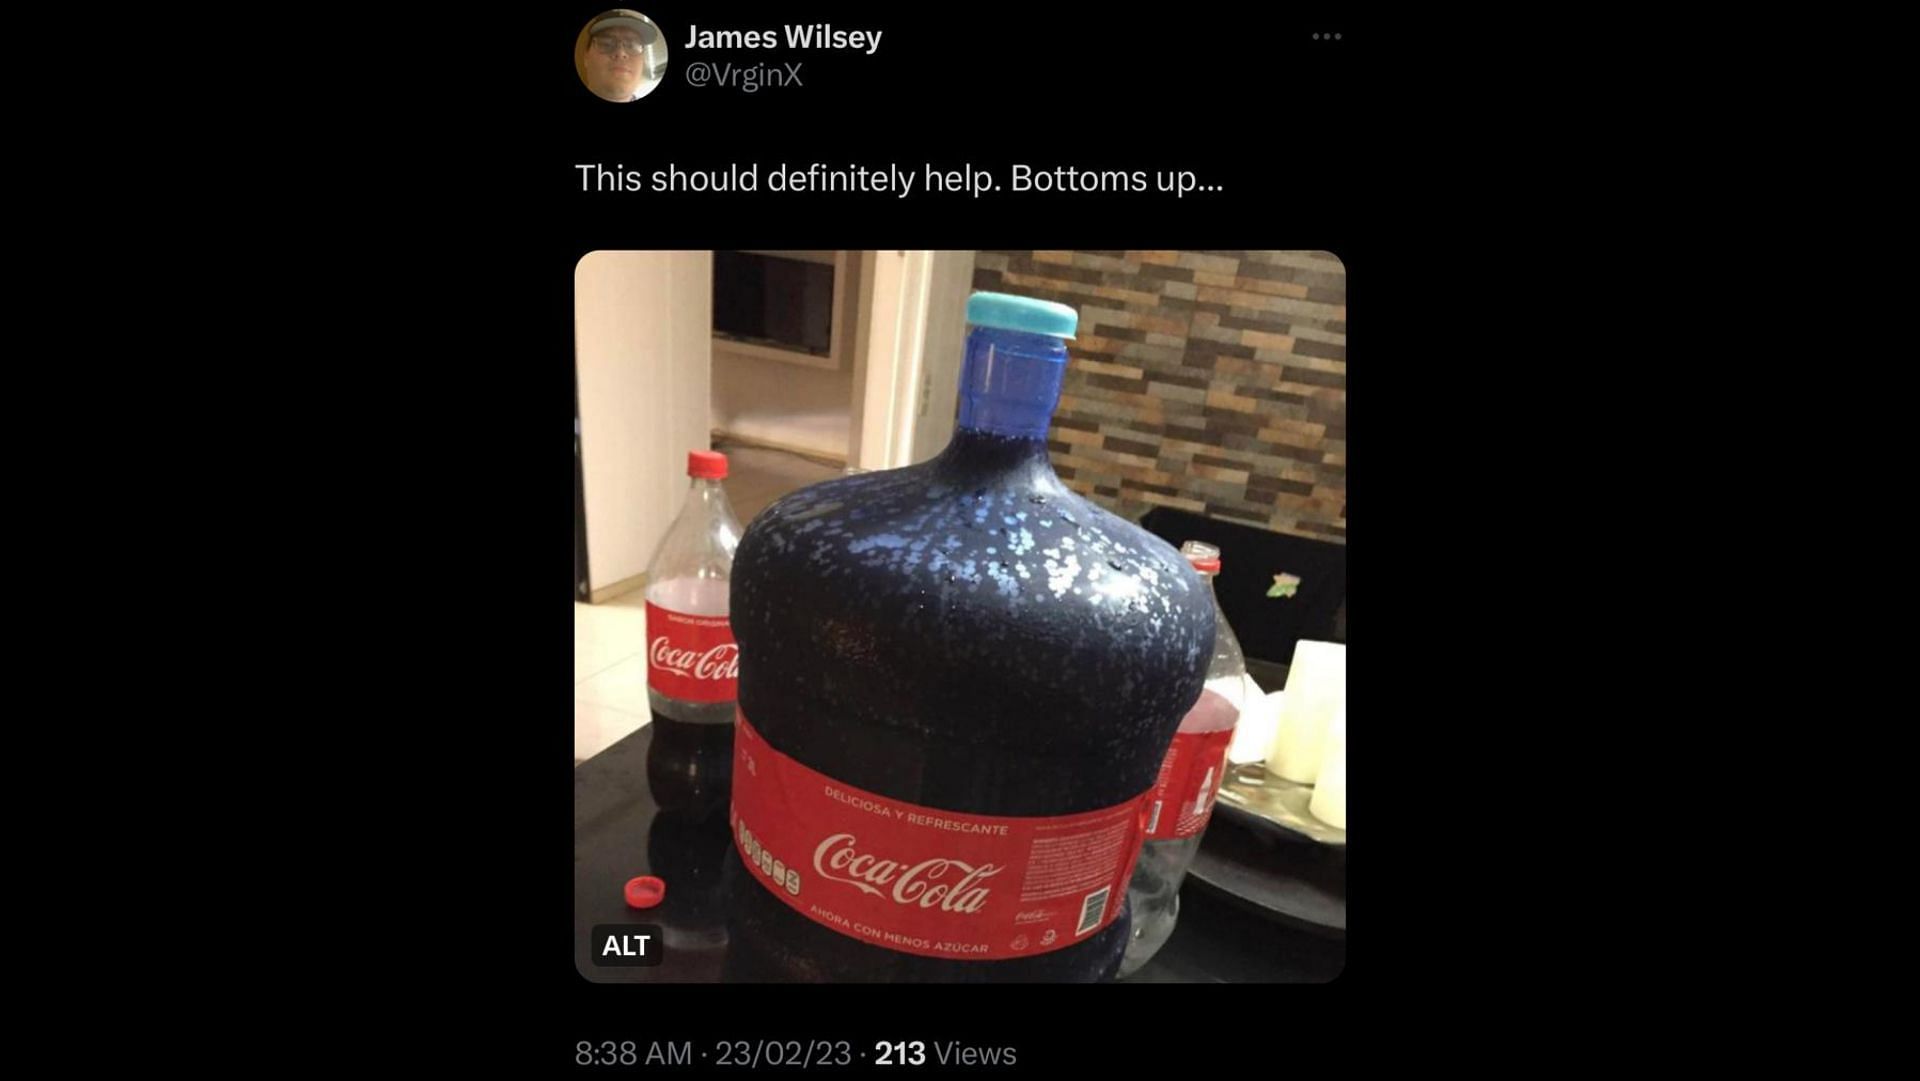 Screenshot of a Twitter user responding to the claim that consuming aerated drinks could lead to larger testicles and higher testosterone levels.